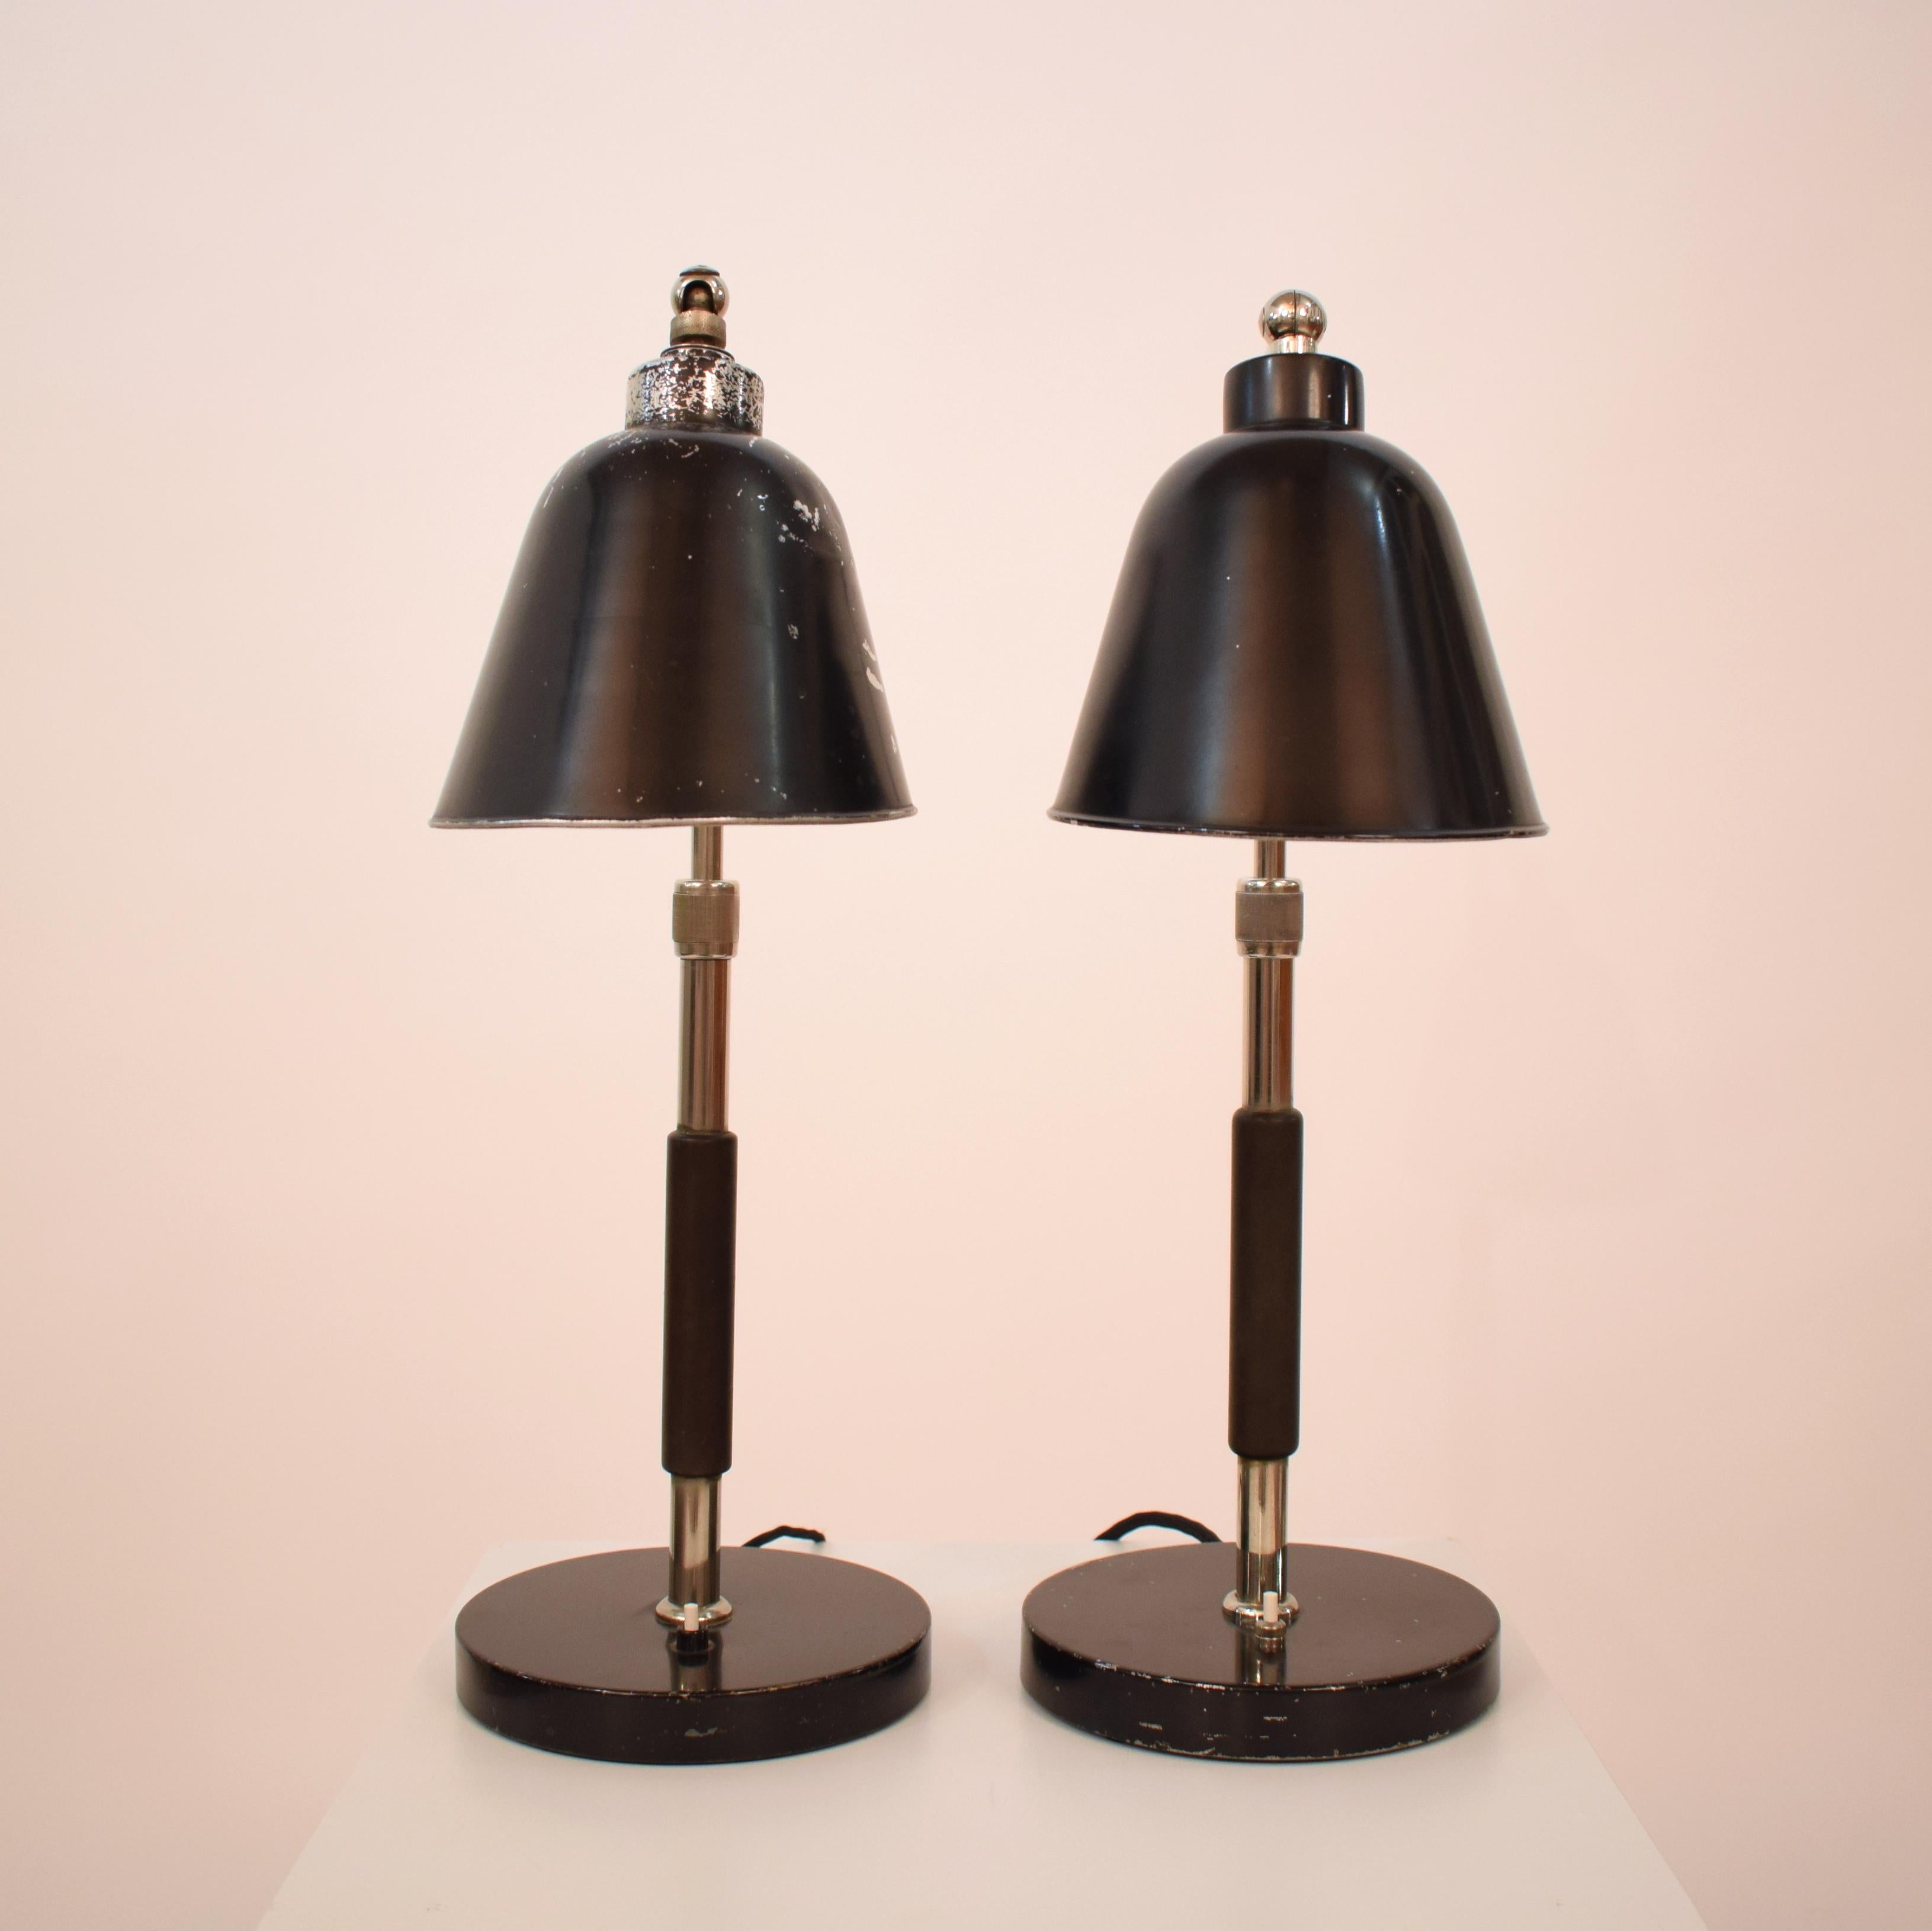 This elegant and rare pair of 1930 Bauhaus table lamps by Christian Dell for Bünte & Remmler are named 